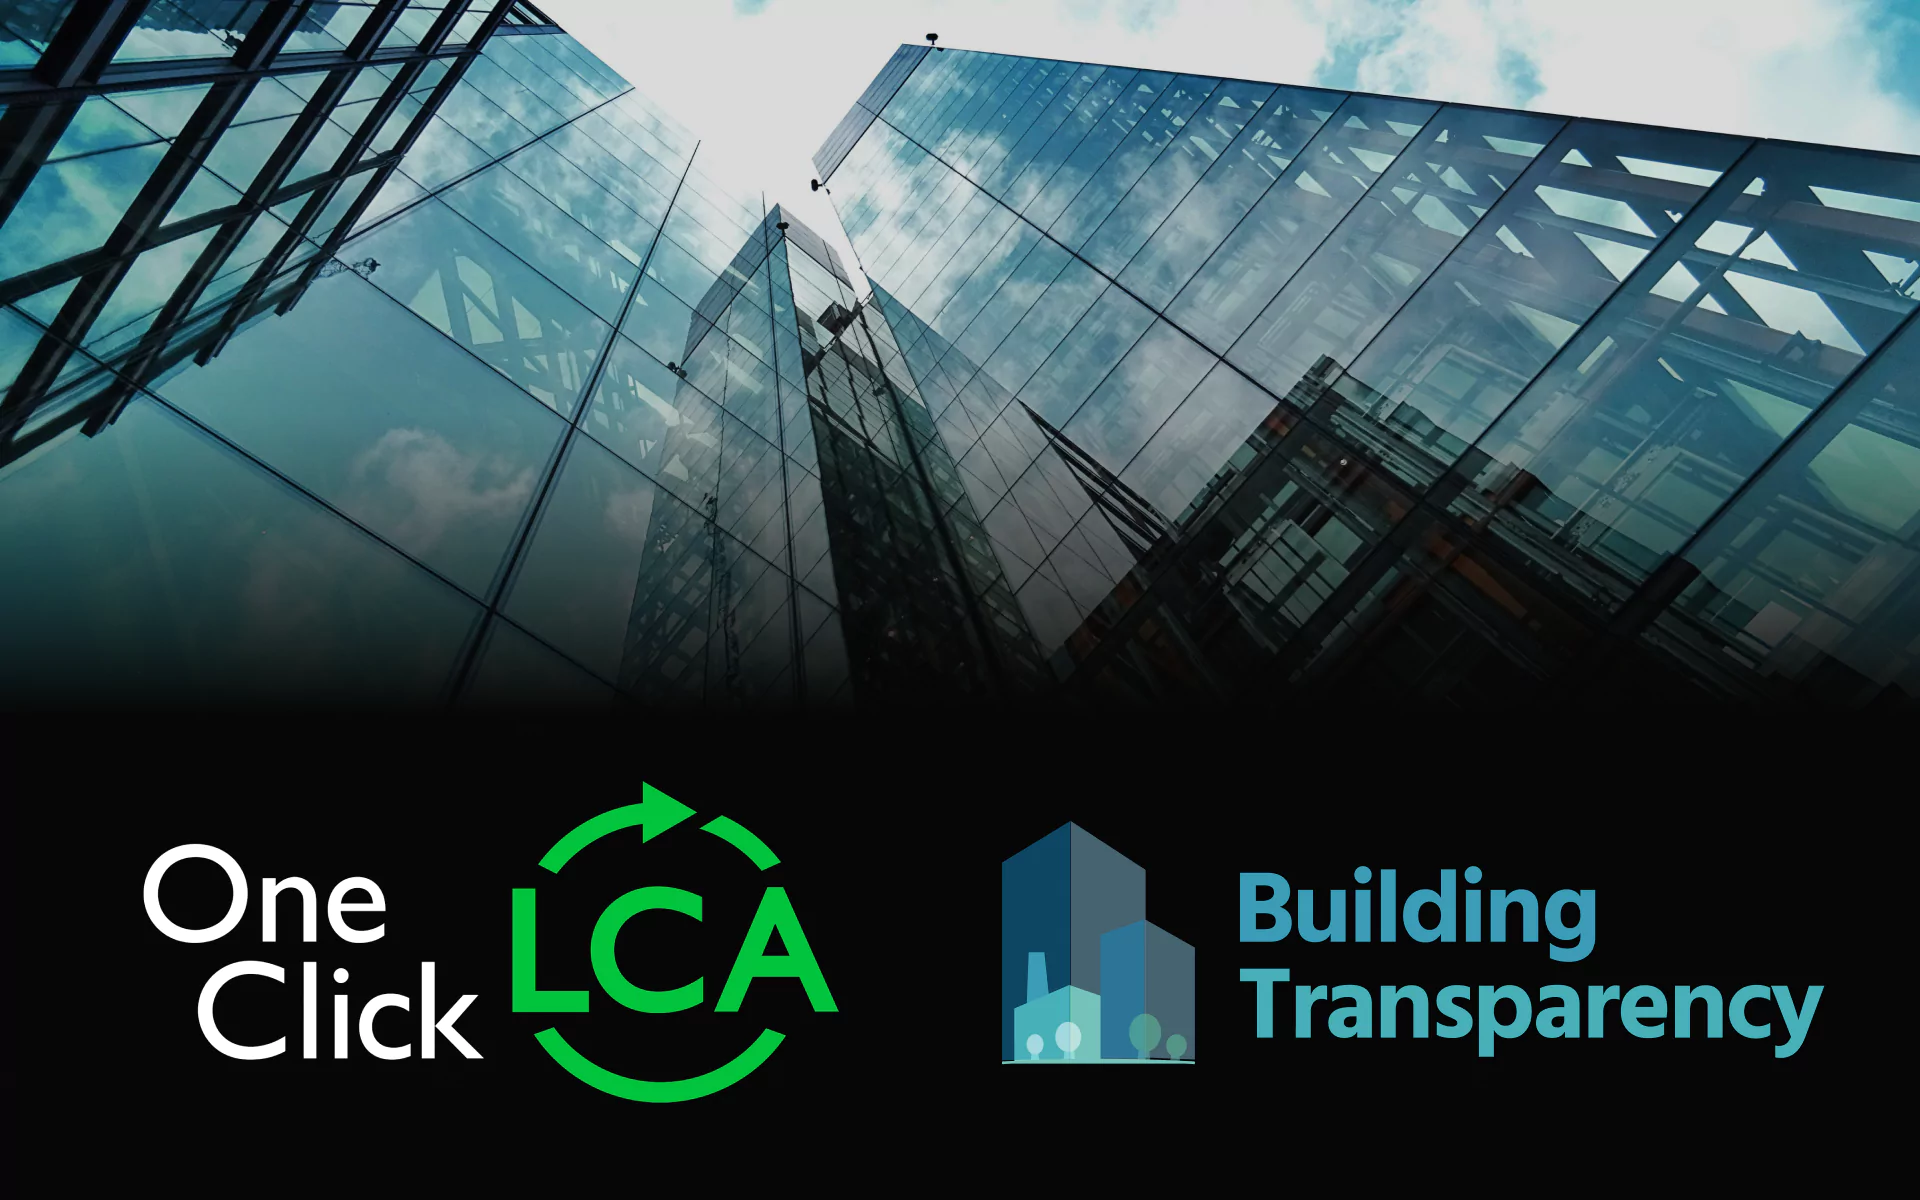 One Click LCA & Building Transparency partnership enables decarbonization across building sector